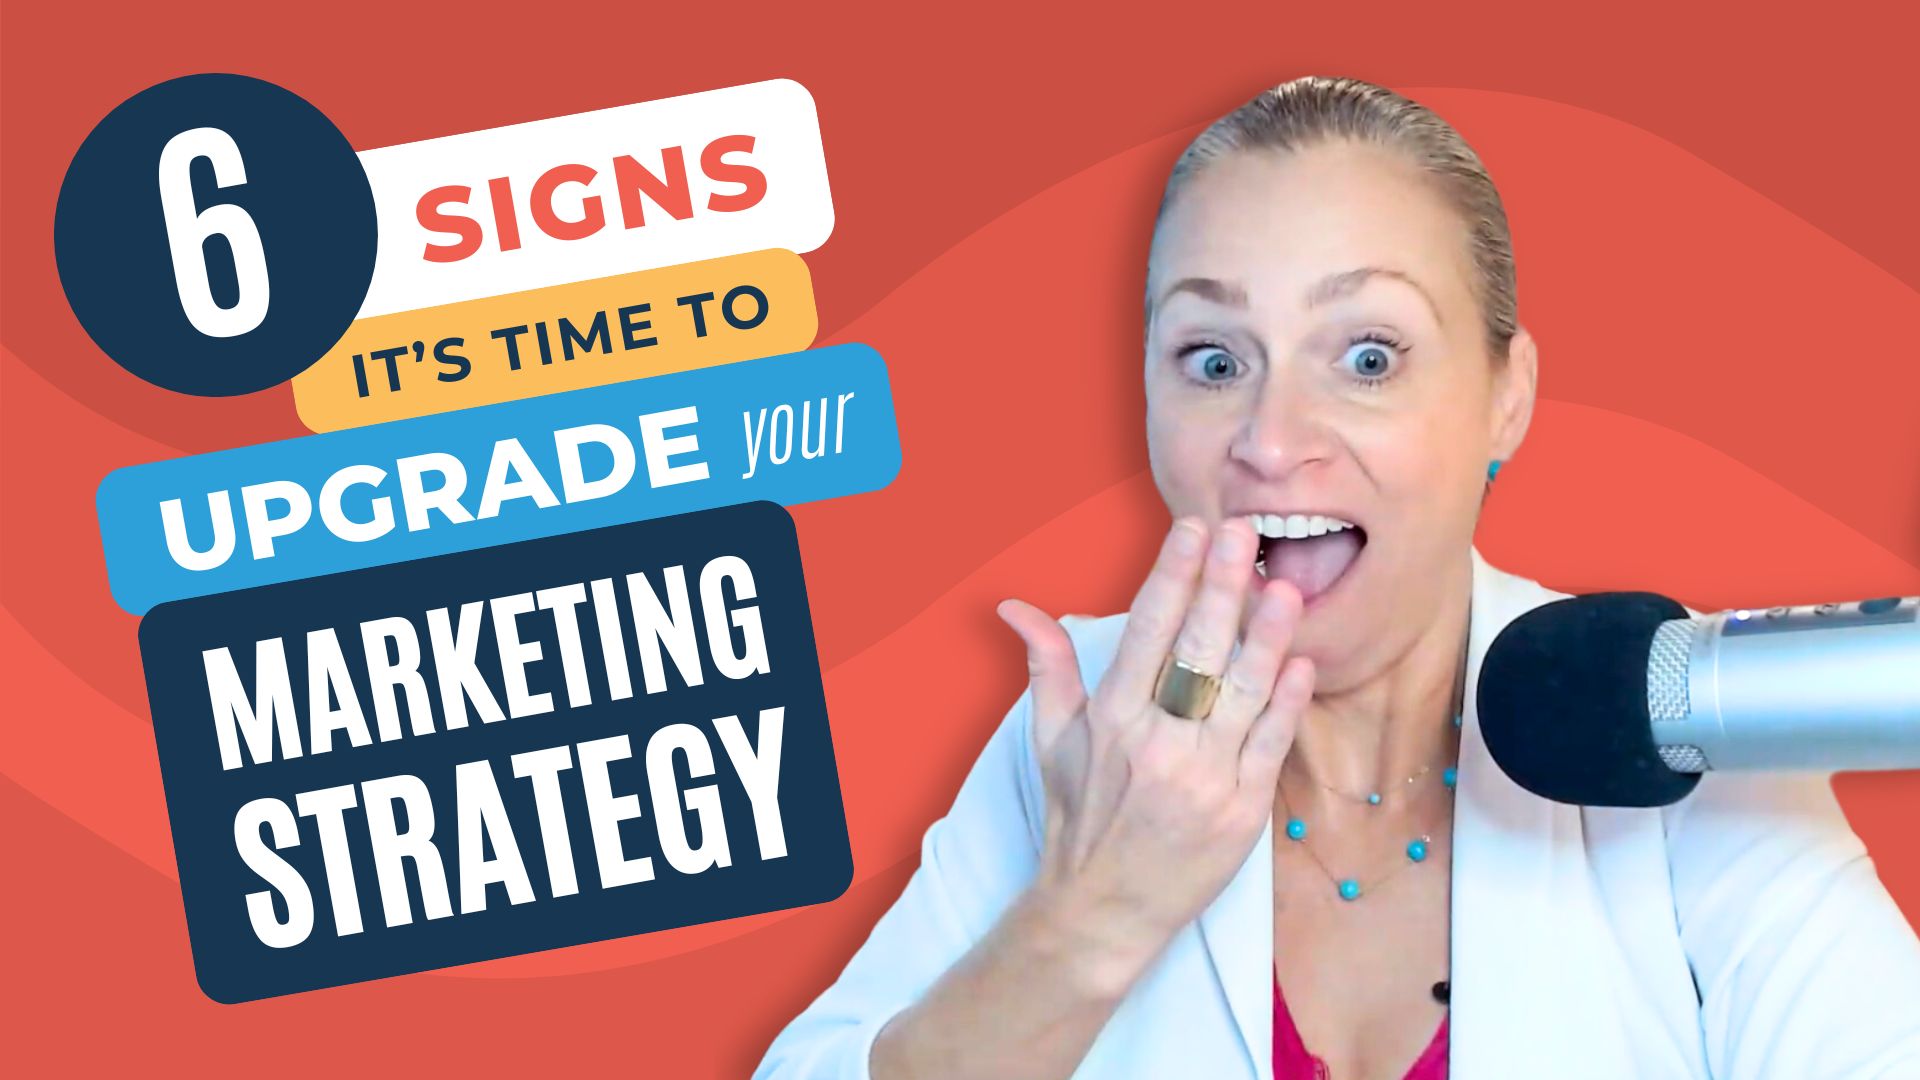 6 Signs It's Time To Upgrade Your Marketing Strategy